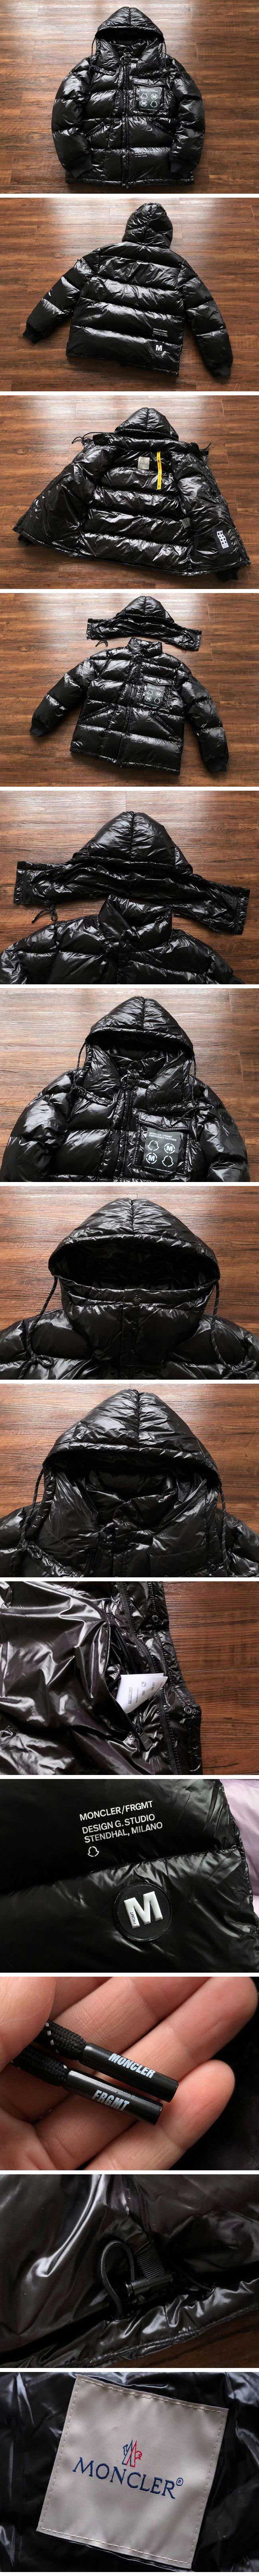 Moncler x Fragment Anthemyx Quilted Shell Hooded Down Jacket モンクレール x フラグメント アンセミックス キルティング シェル フード ダウン ジャケット ブラック